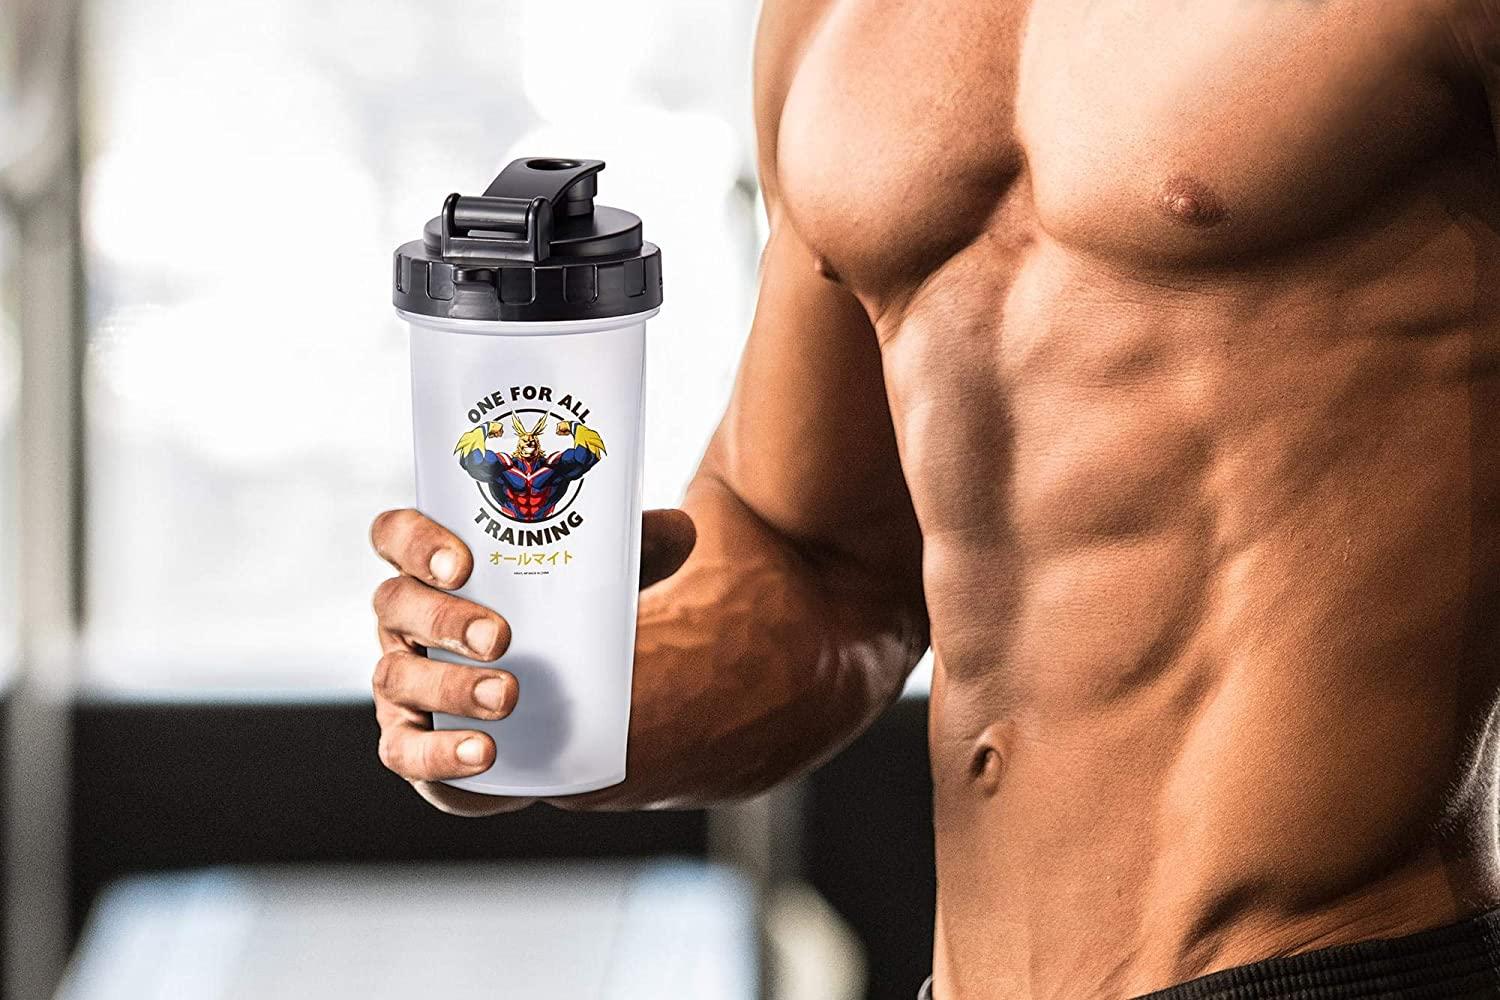 When it's time to pump iron, I need my favorite gym bottle #shaker